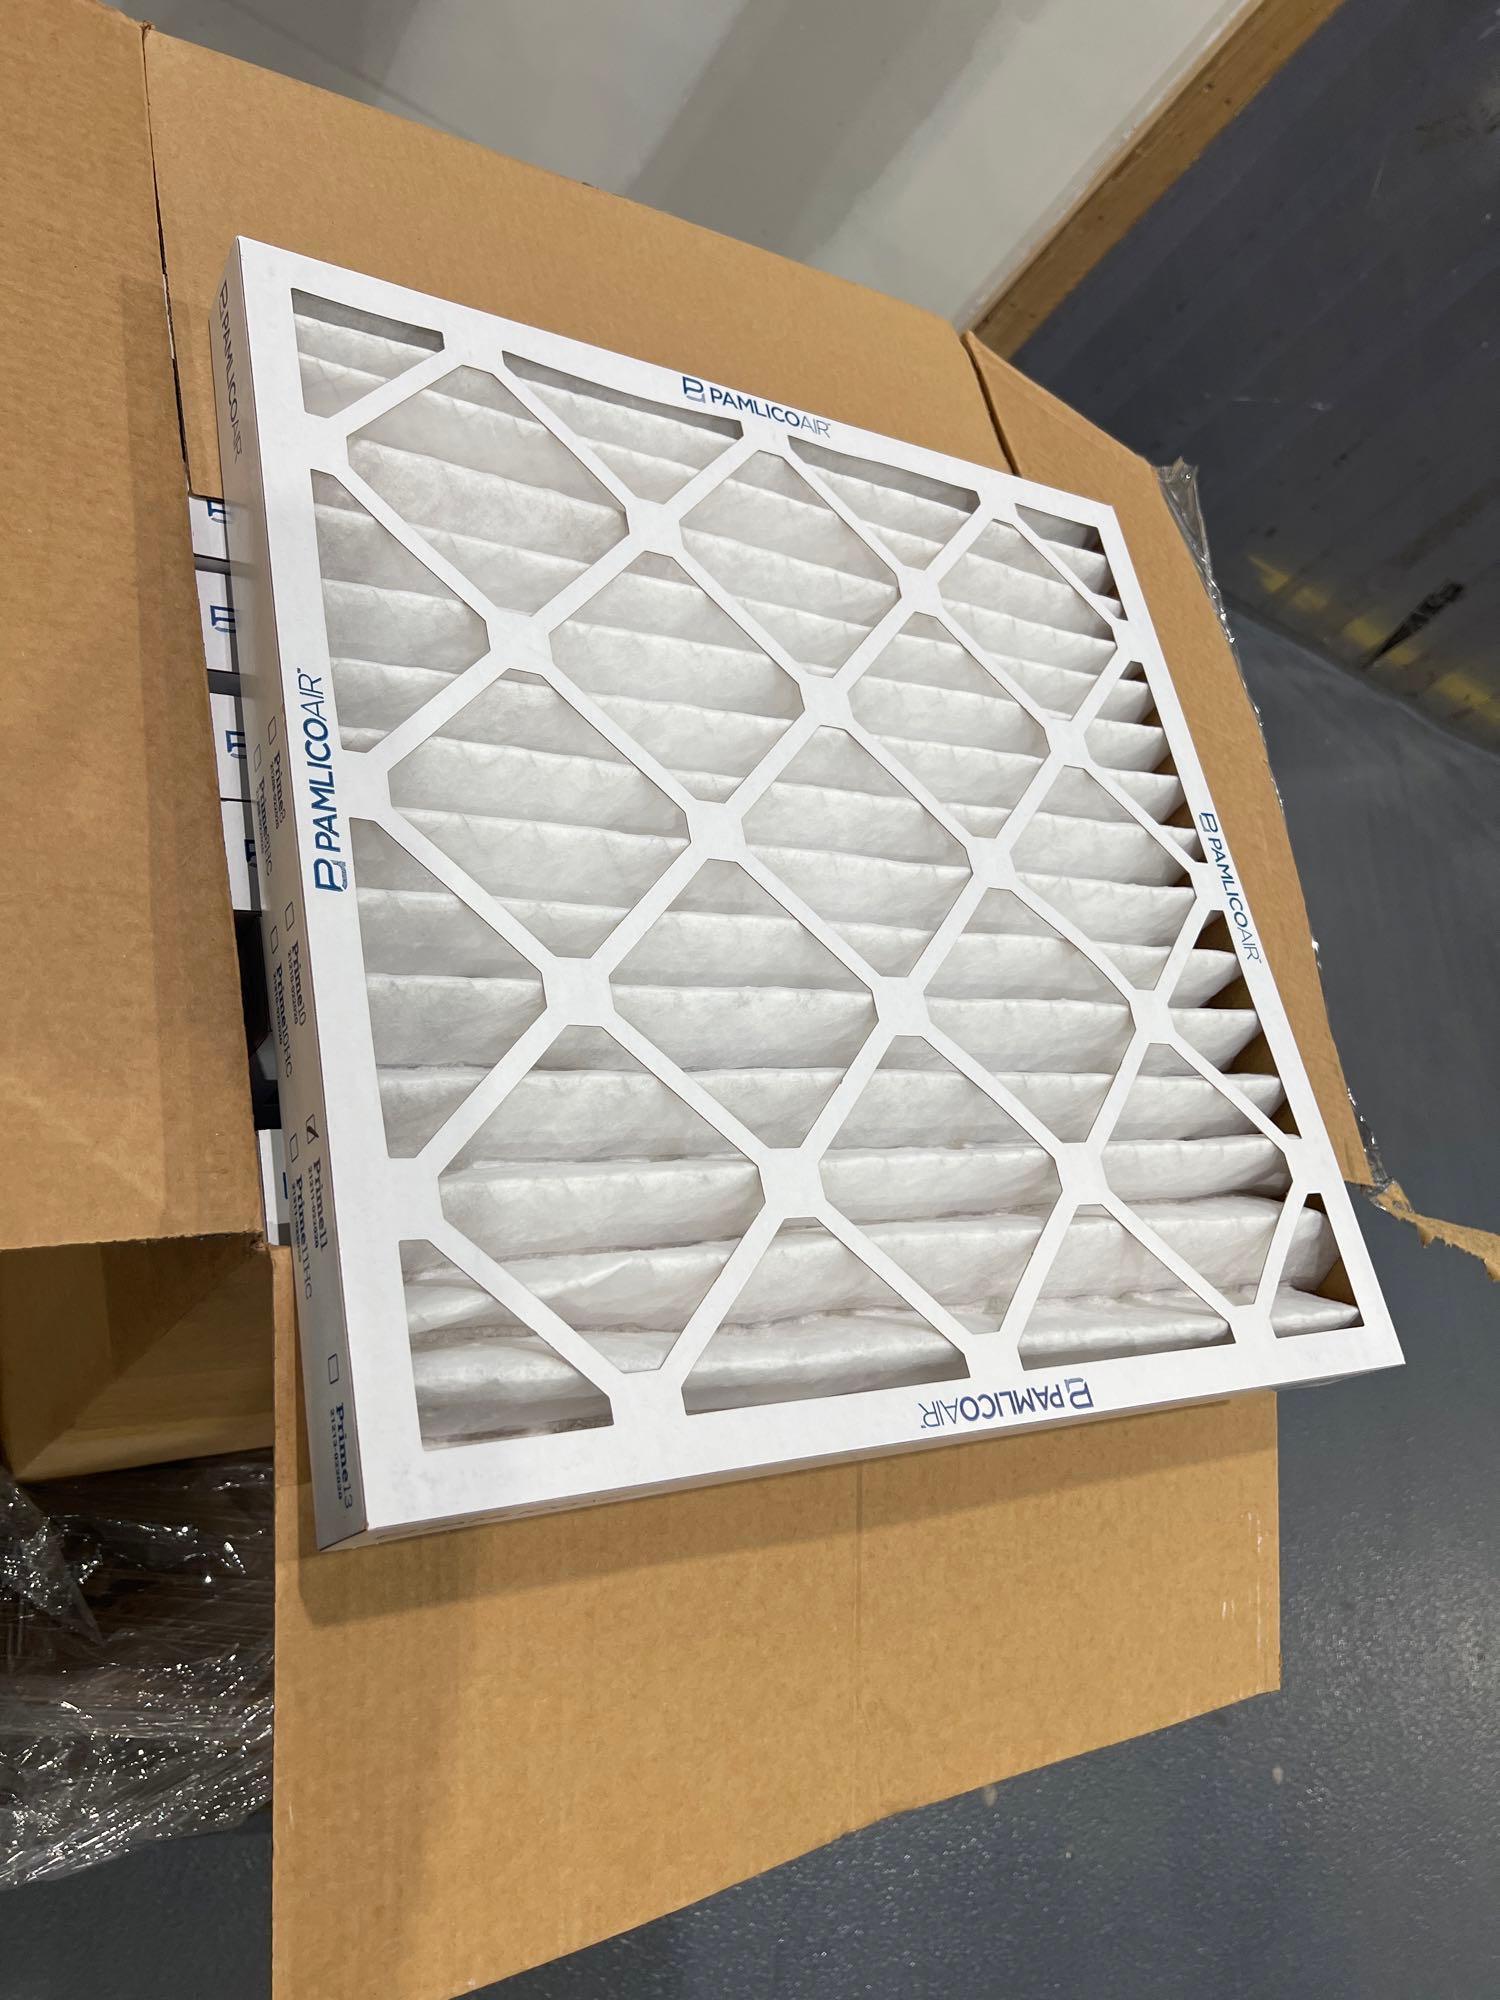 PALLET OF UNUSED AIR FILTERS. 20x20x2 (3 BOXES / 12 PER BOX)